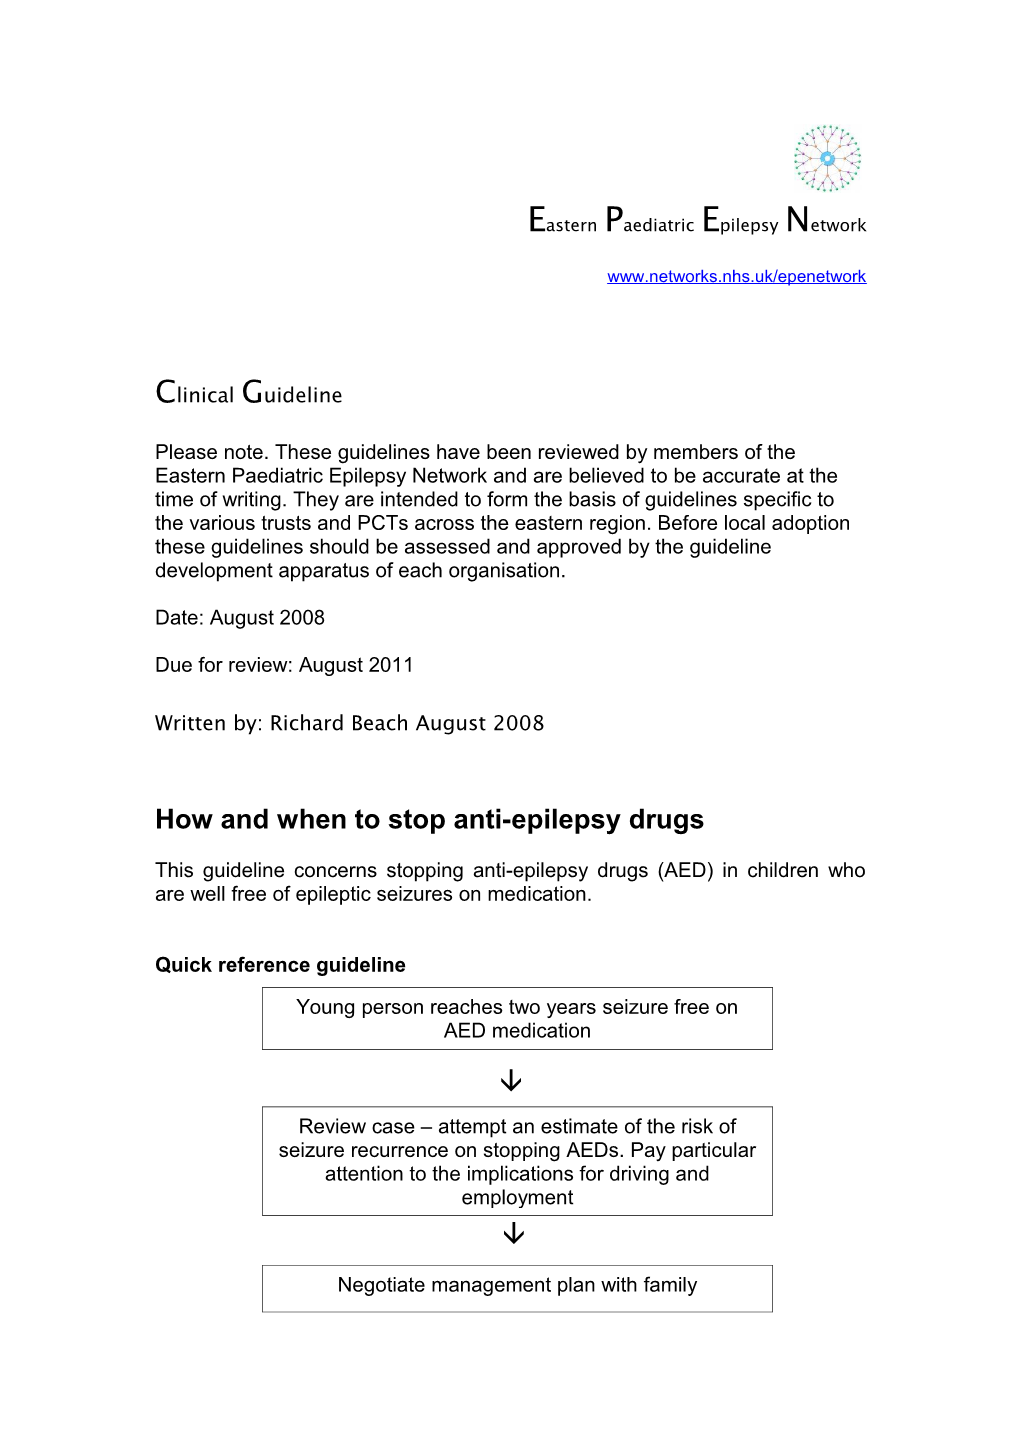 How and When to Stop Anti Epilepsy Drugs